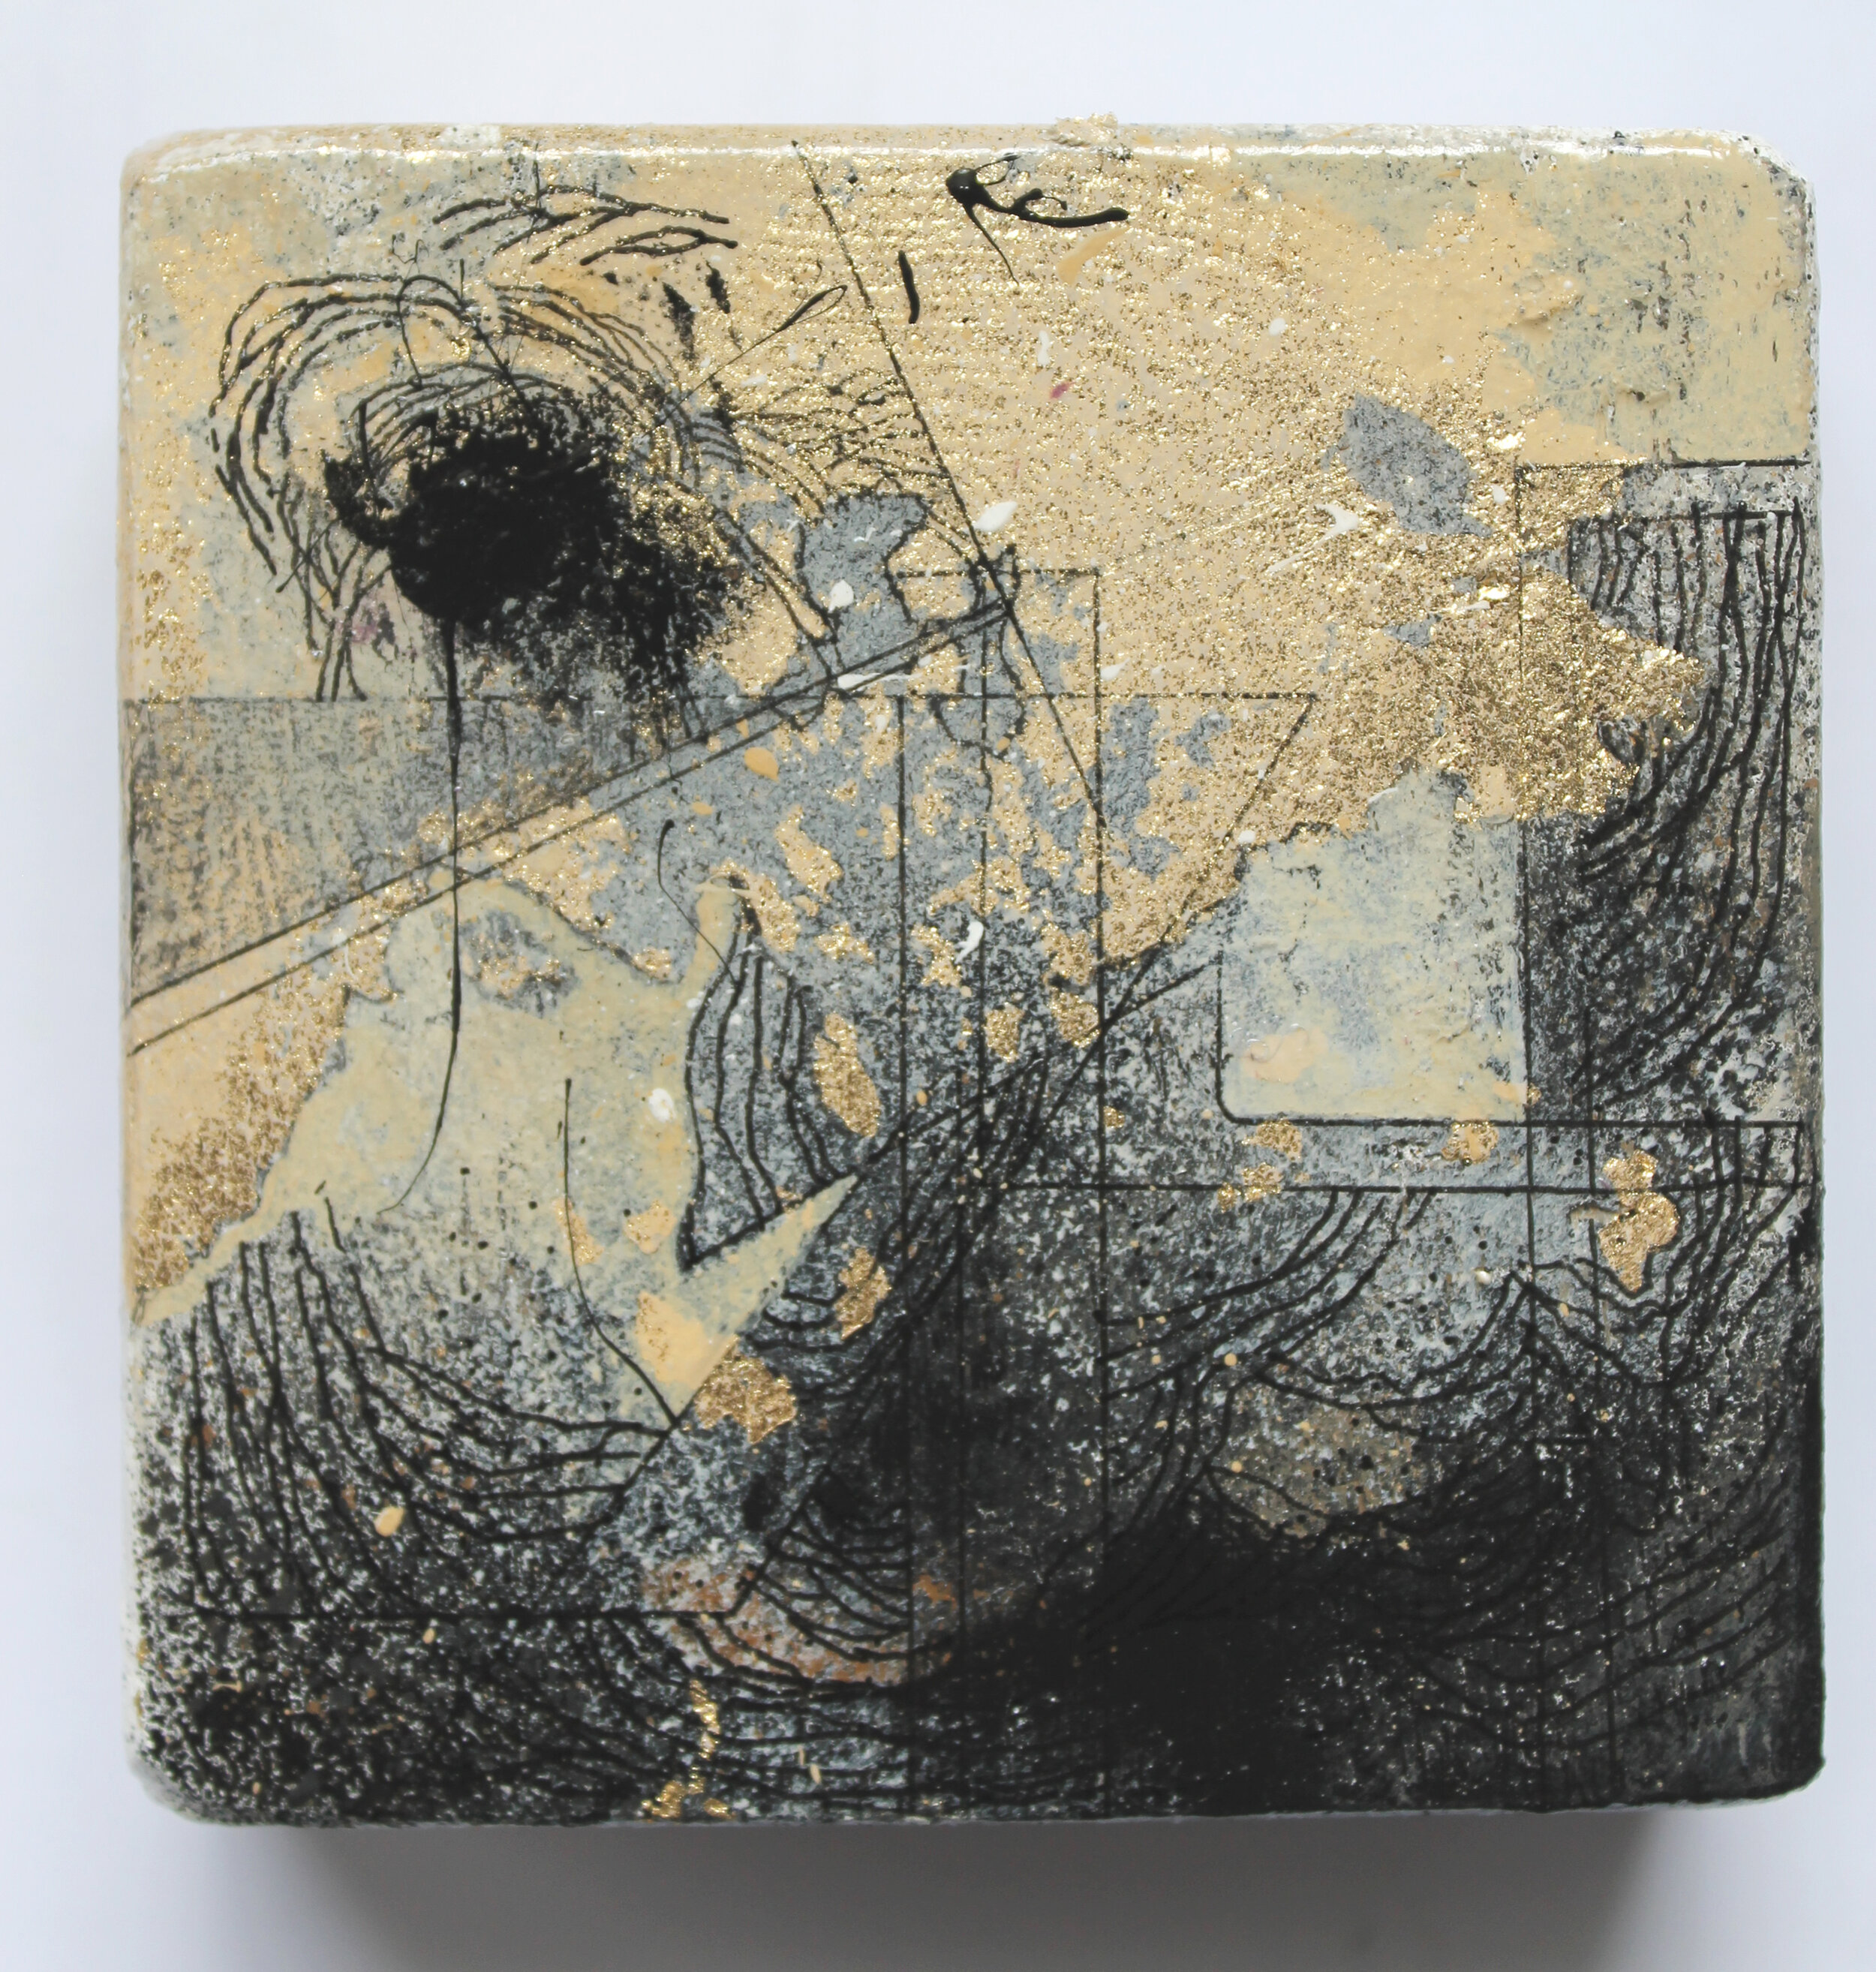  3 x 3 inches  Woodblock  Acrylic, Ink, Micron , Metal Leaf, Spray paint  Summer, 2020 